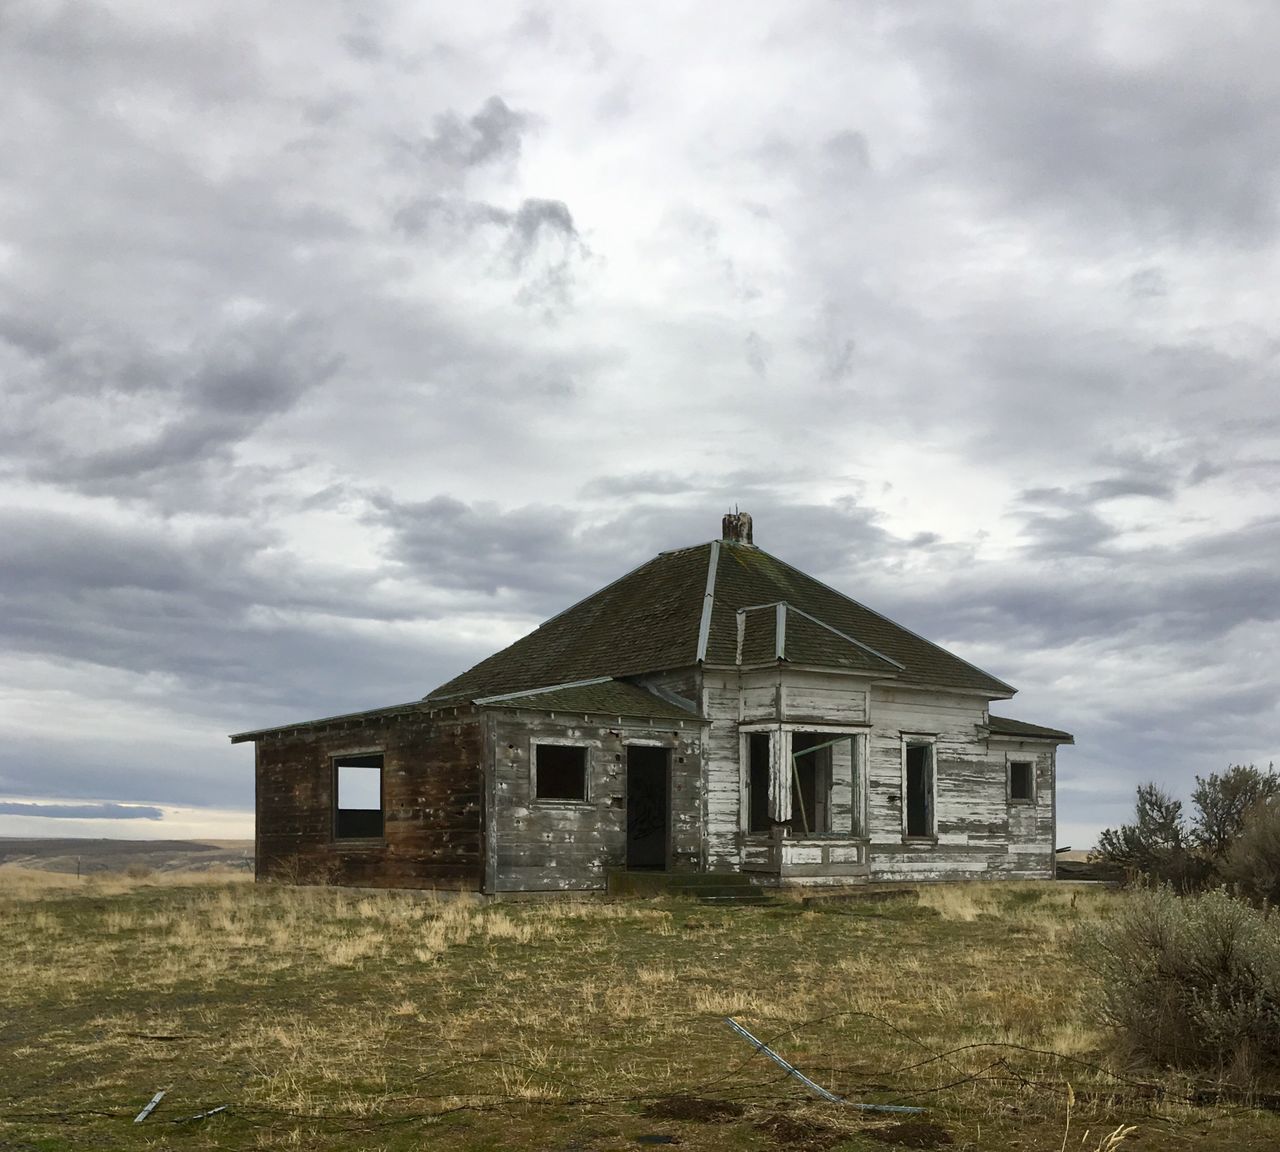 cloud - sky, built structure, architecture, building exterior, building, abandoned, sky, house, land, field, run-down, grass, plant, nature, old, no people, day, decline, agricultural building, deterioration, outdoors, ruined